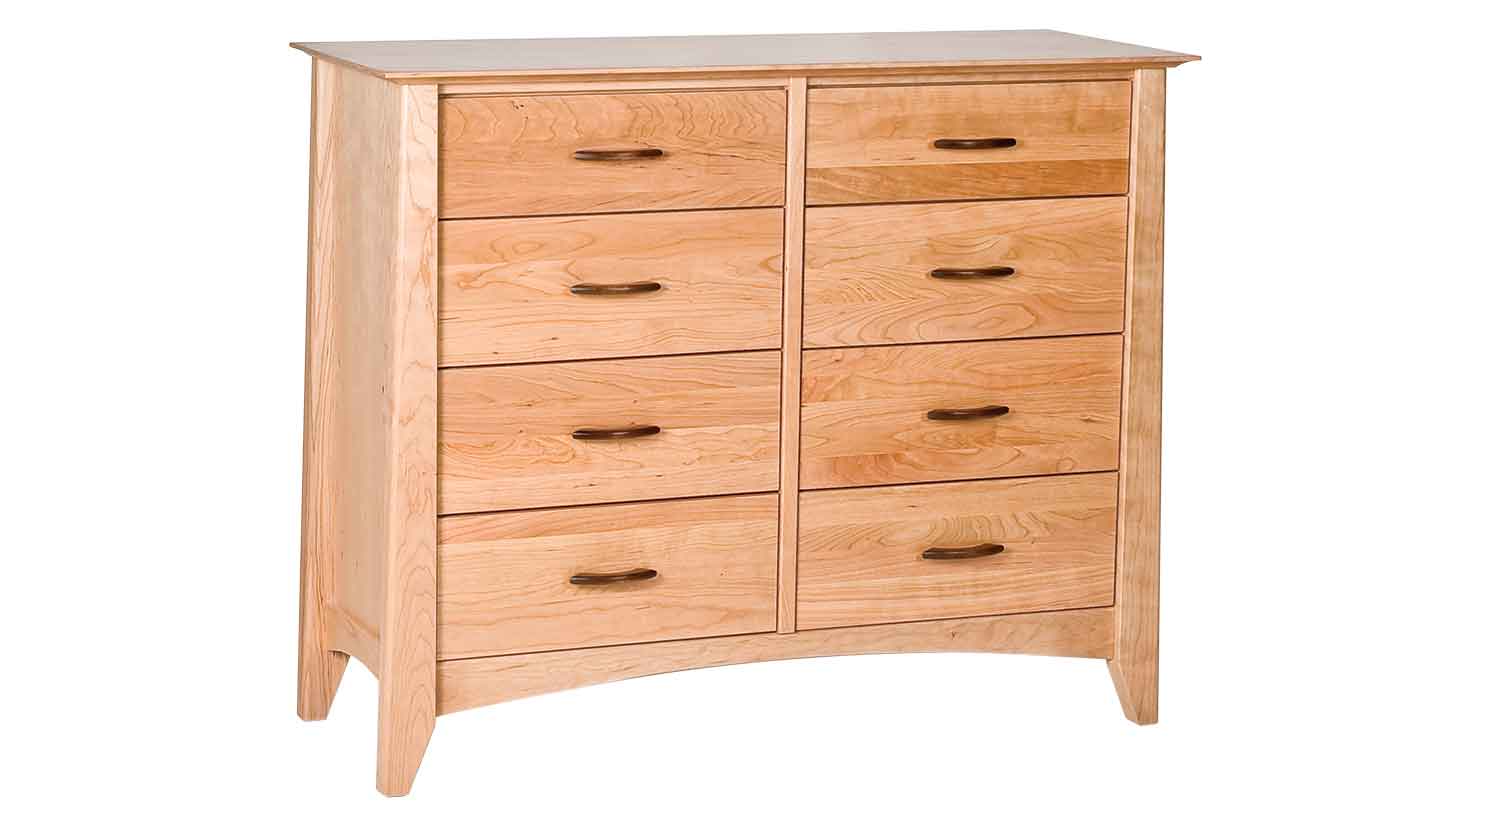 Circle Furniture Willow Small 8 Drawer Dresser Bedroom